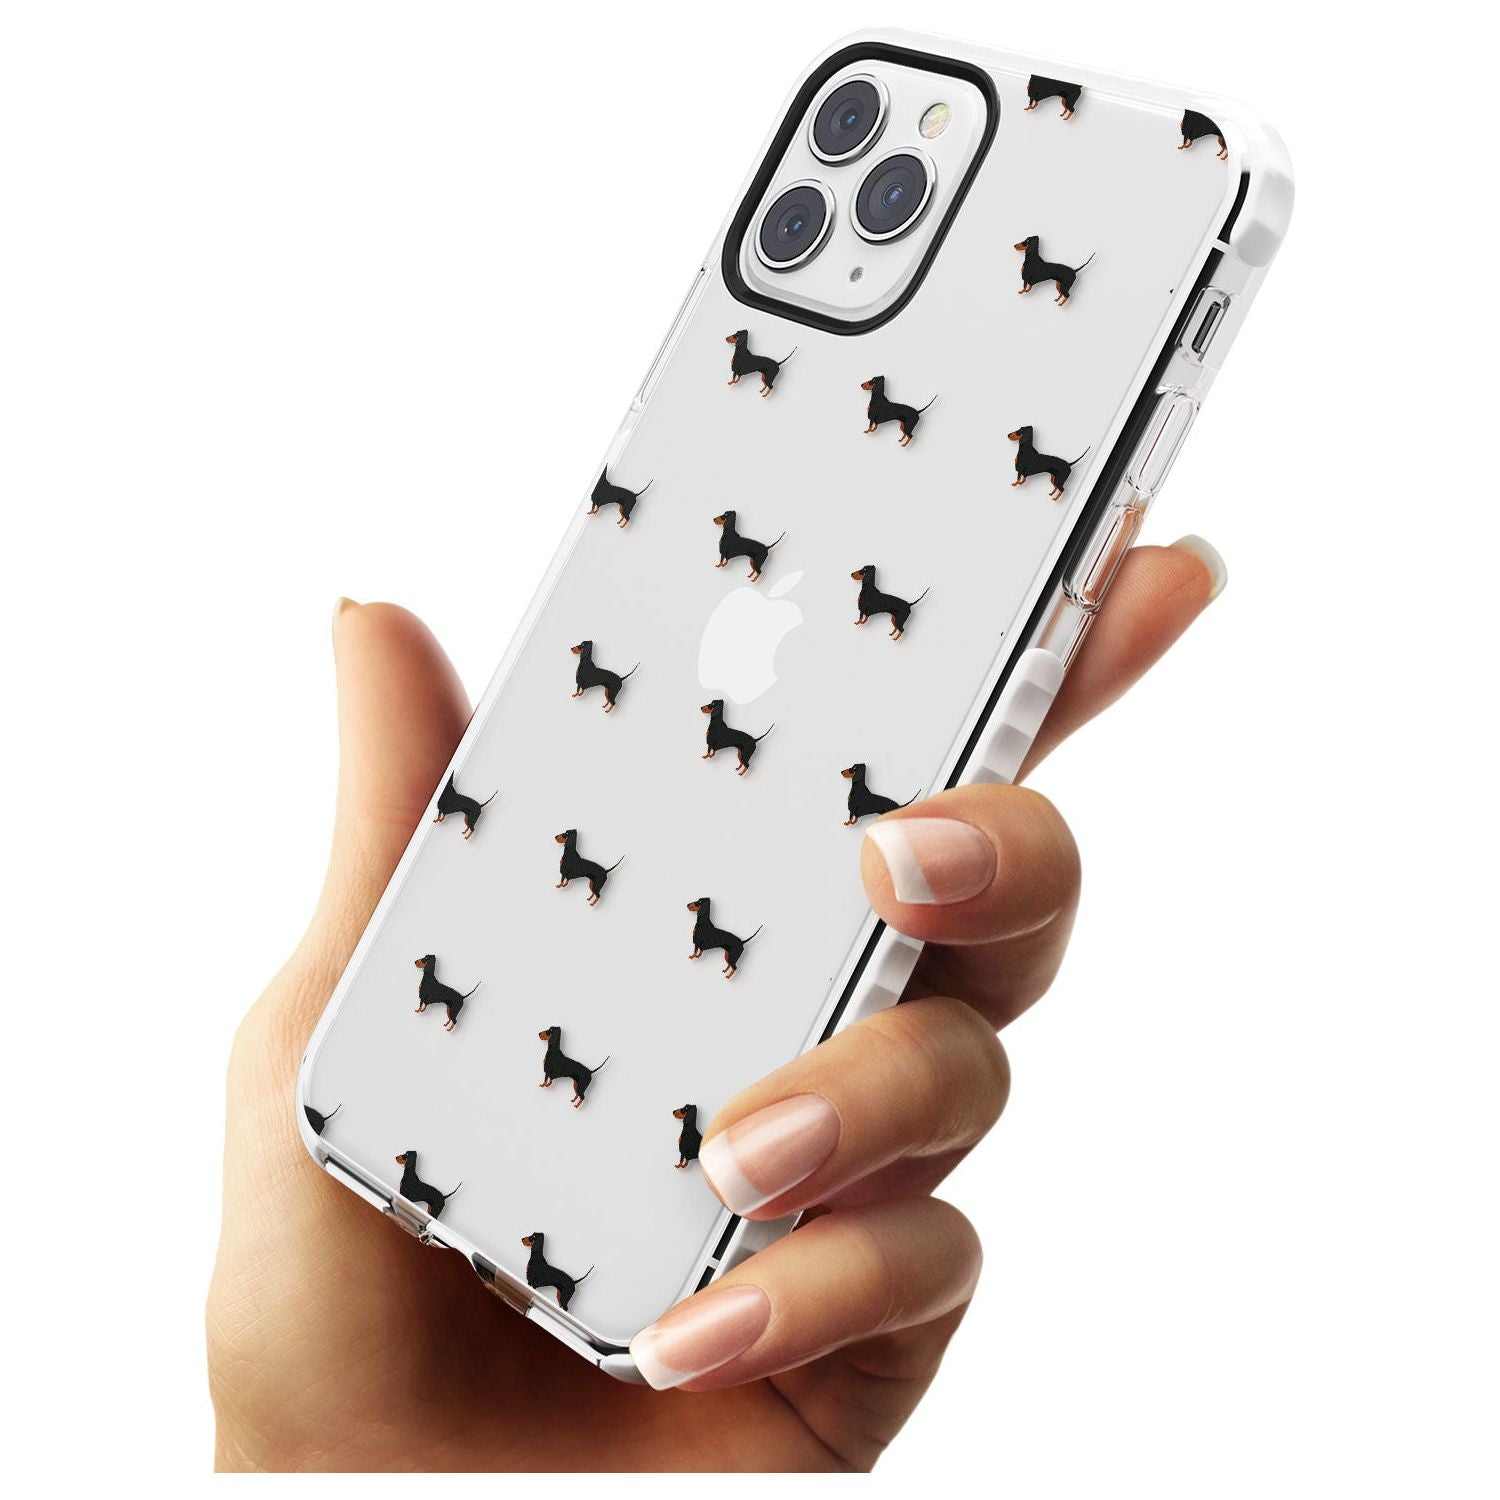 Dachshund Dog Pattern Clear Impact Phone Case for iPhone 11 Pro Max